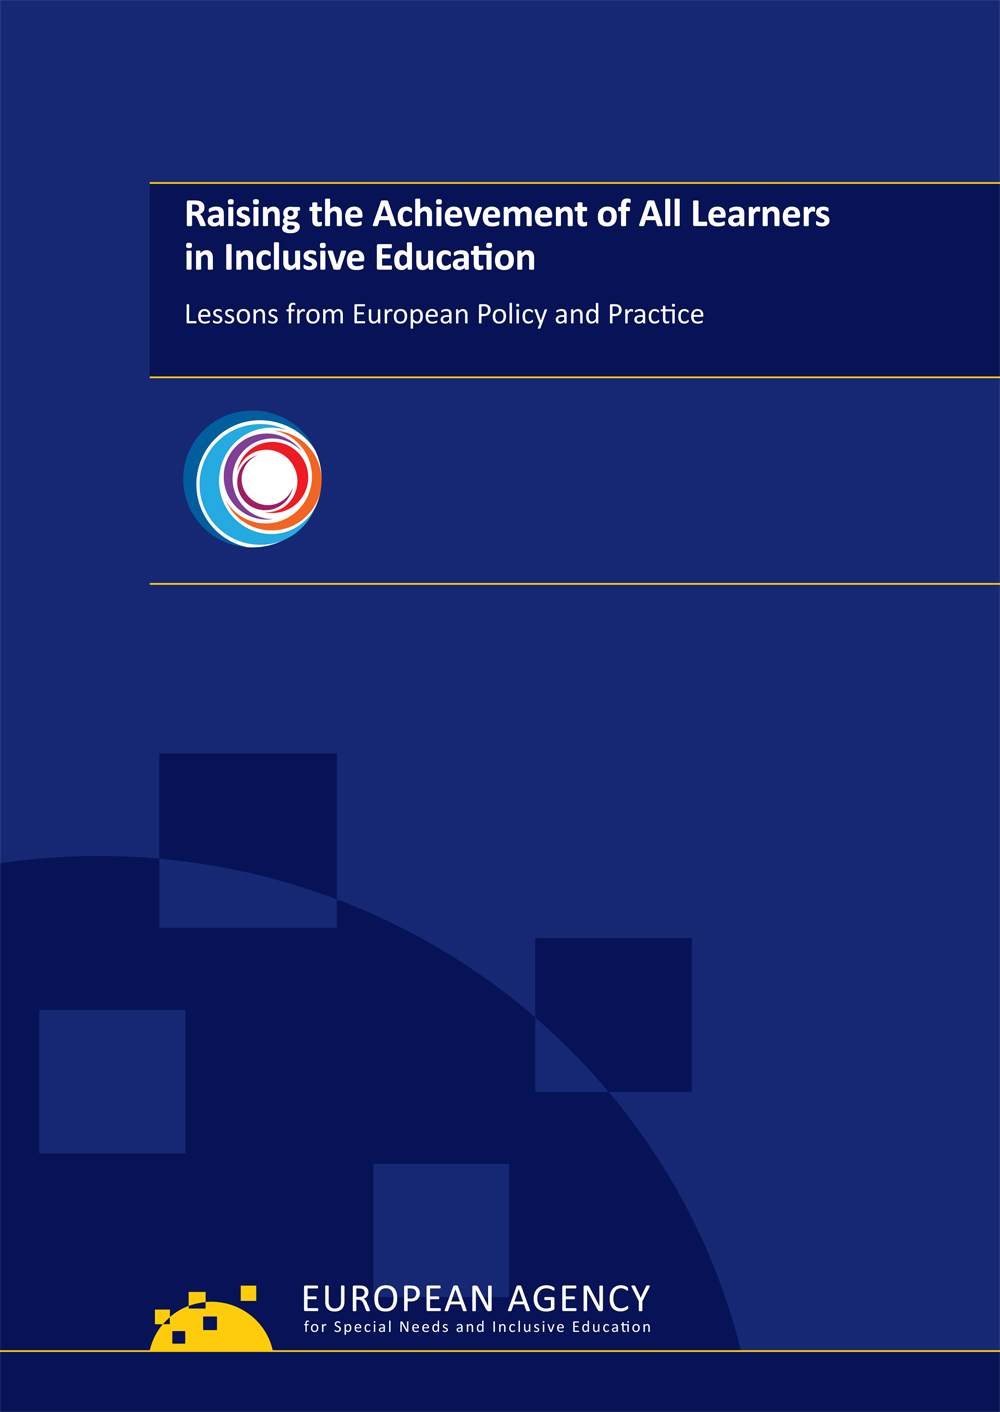 Raising the Achievement of All Learners in Inclusive Education: Lessons from European Policy and Practice